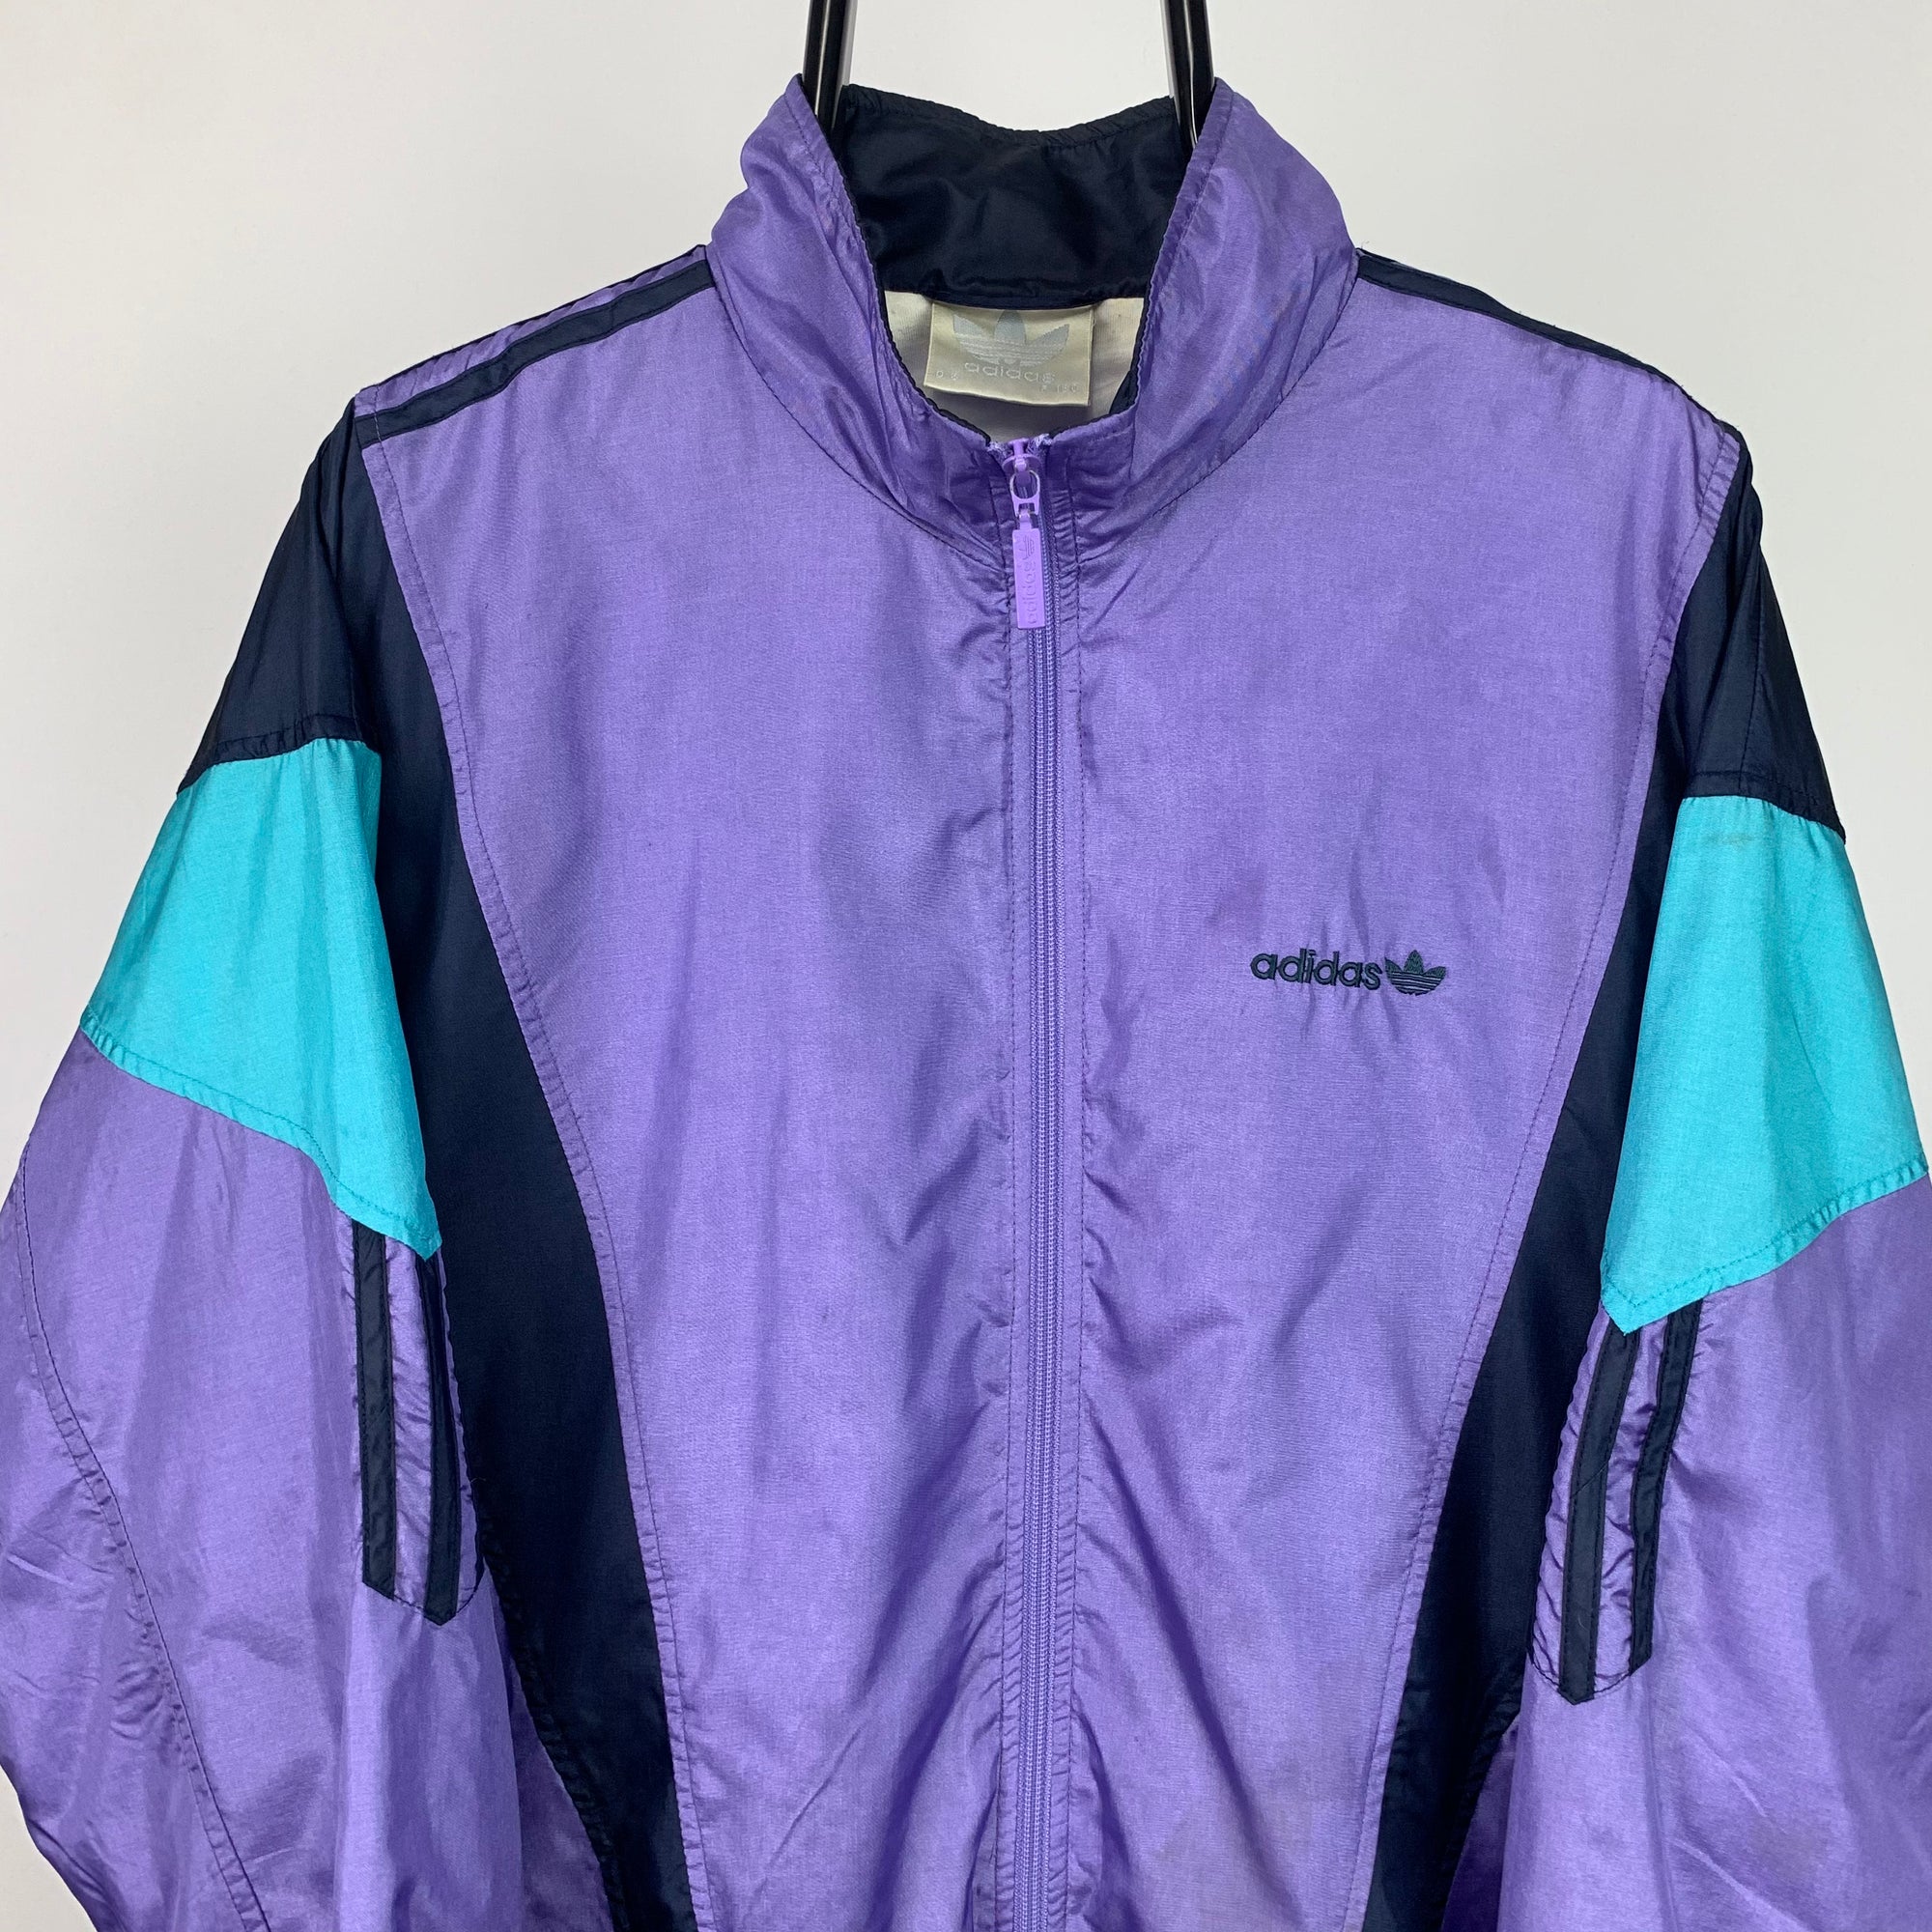 Vintage 90s Adidas Track Jacket in Purple/Navy/Turquoise - Men's Large/Women's XL